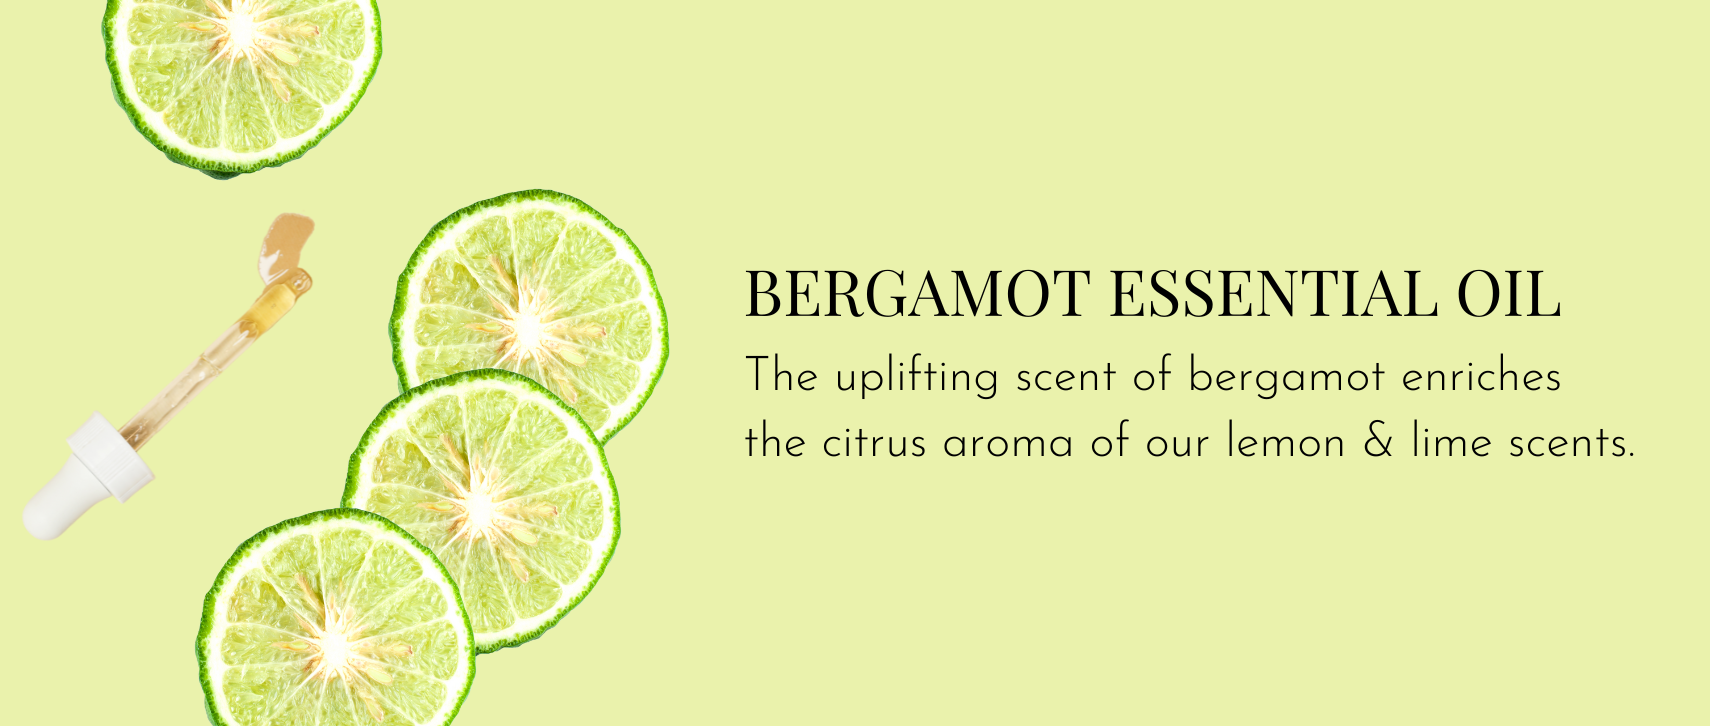 Bergamot Essential Oil – The uplifting scent of bergamot enriches the citrus aroma of our lemon & lime scents.